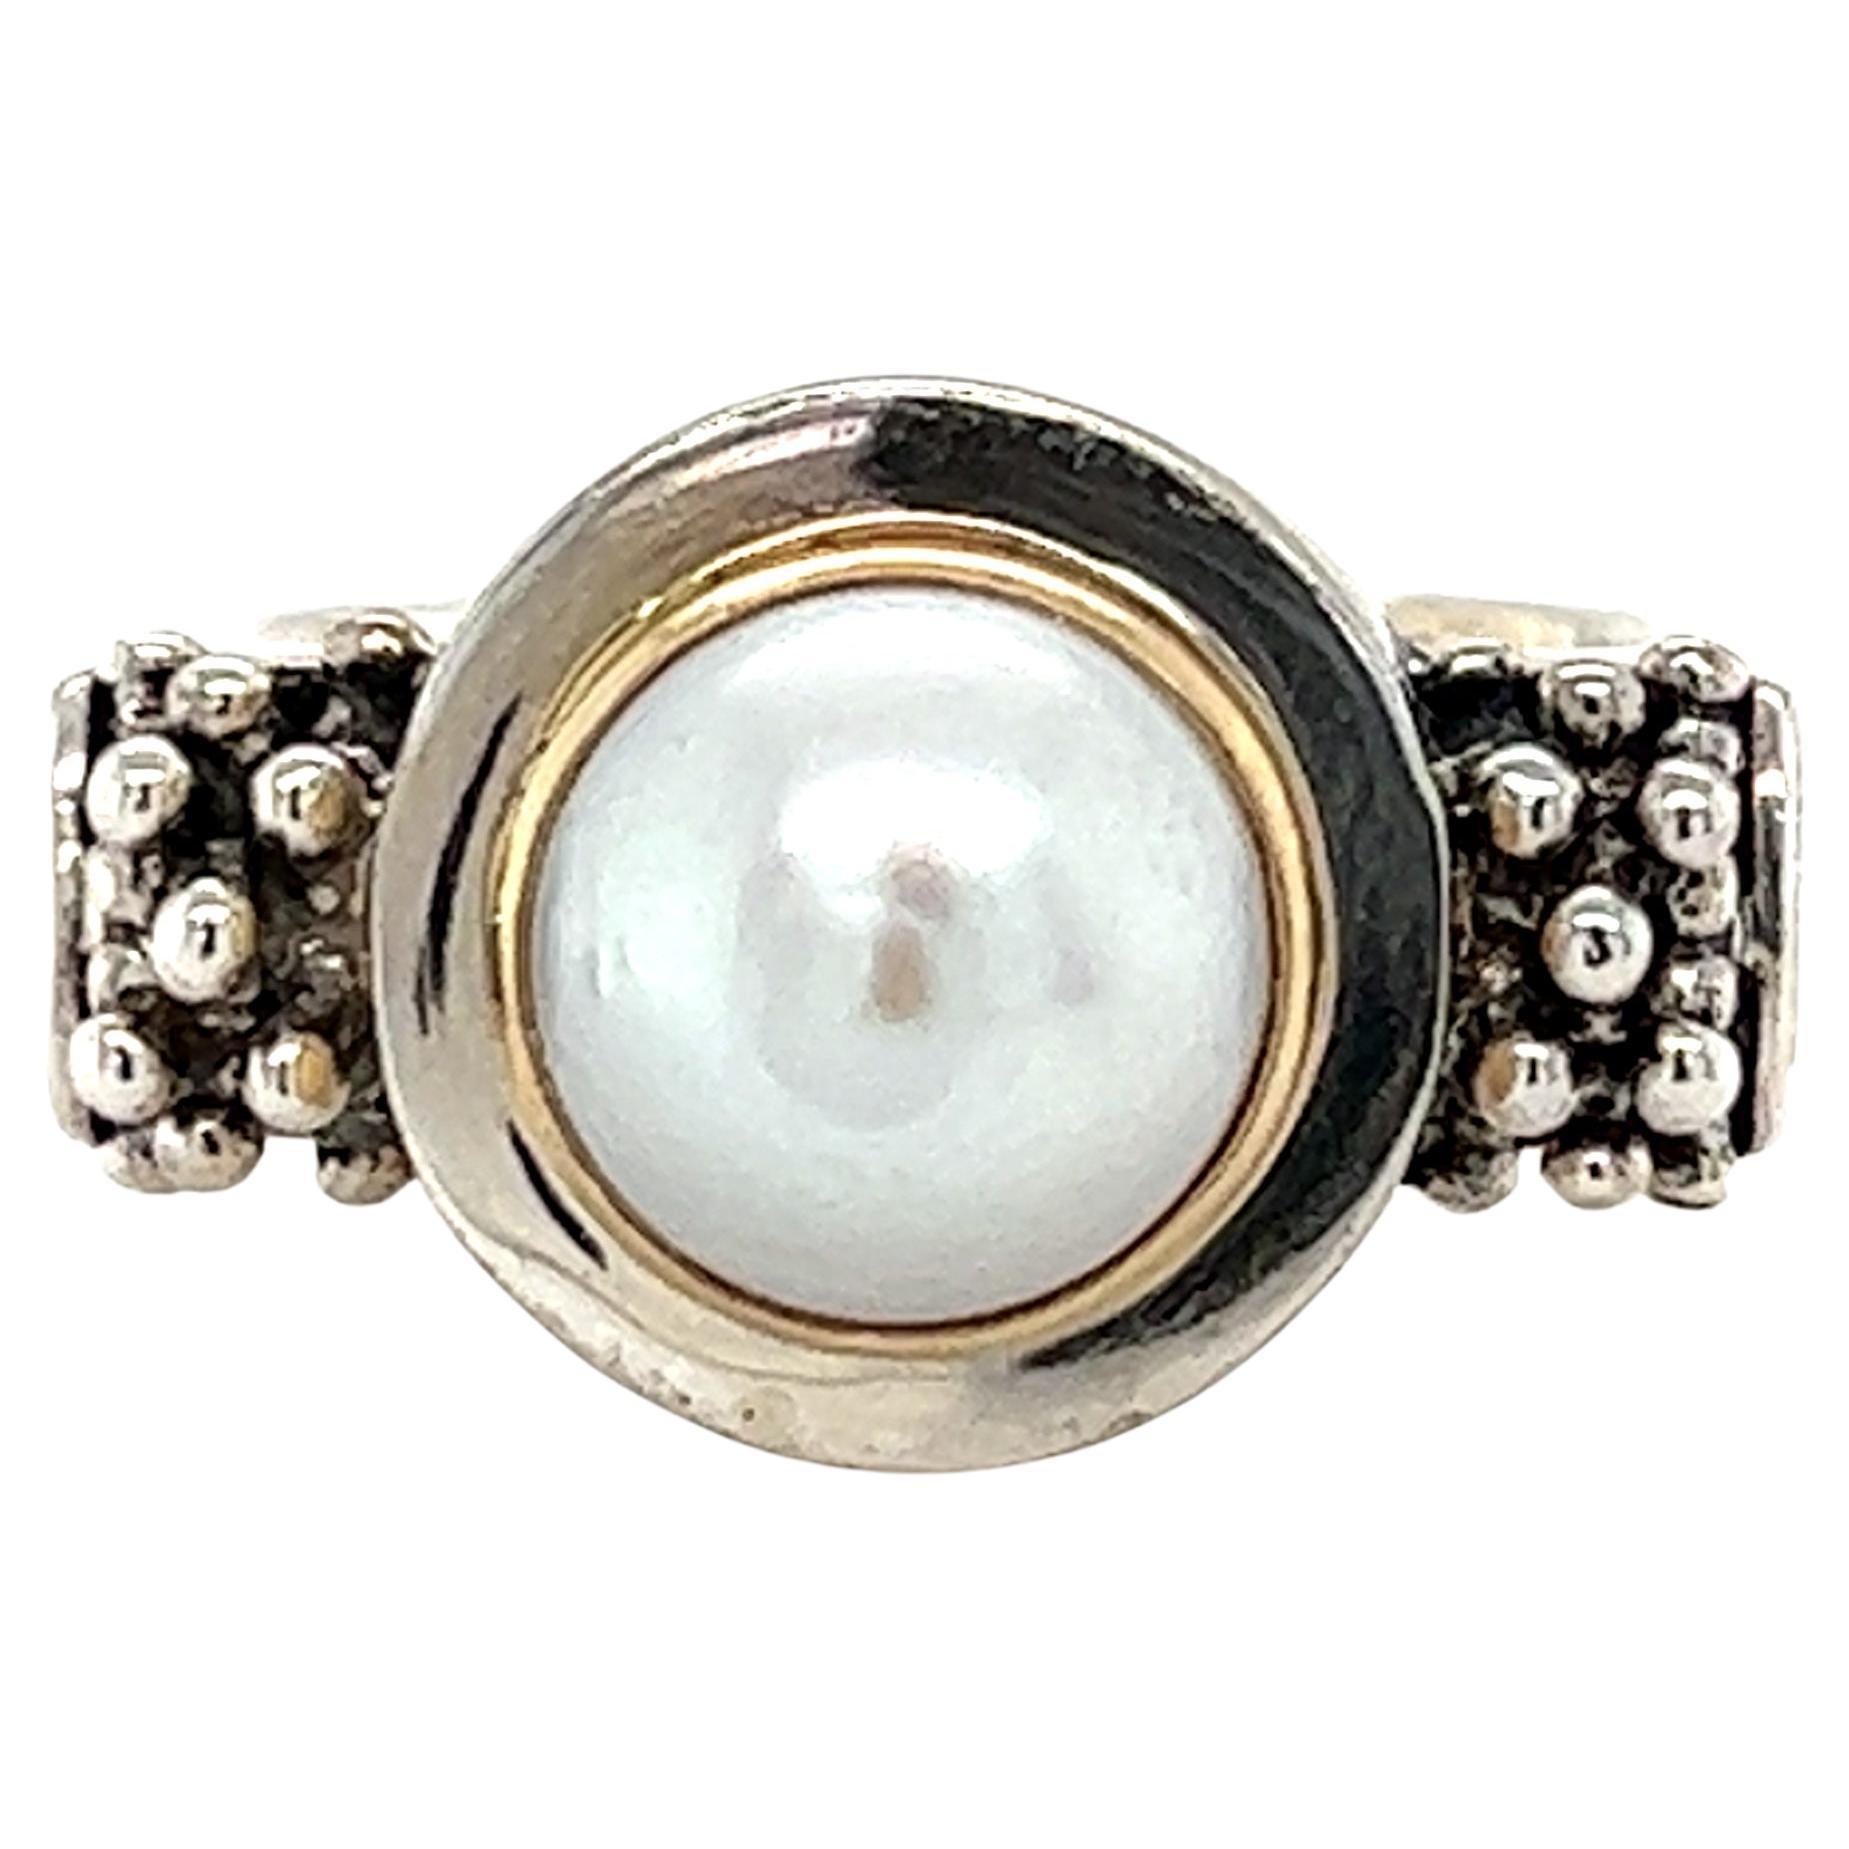 One sterling silver and 14 karat yellow gold (stamped 925 14KT Michael Dawkins) Michael Dawkins ring, set with one 8.8mm bezel set freshwater button pearl.  The ring measures 14.13mm at the top of the ring and tapers to 5.79mm at the base.  The ring